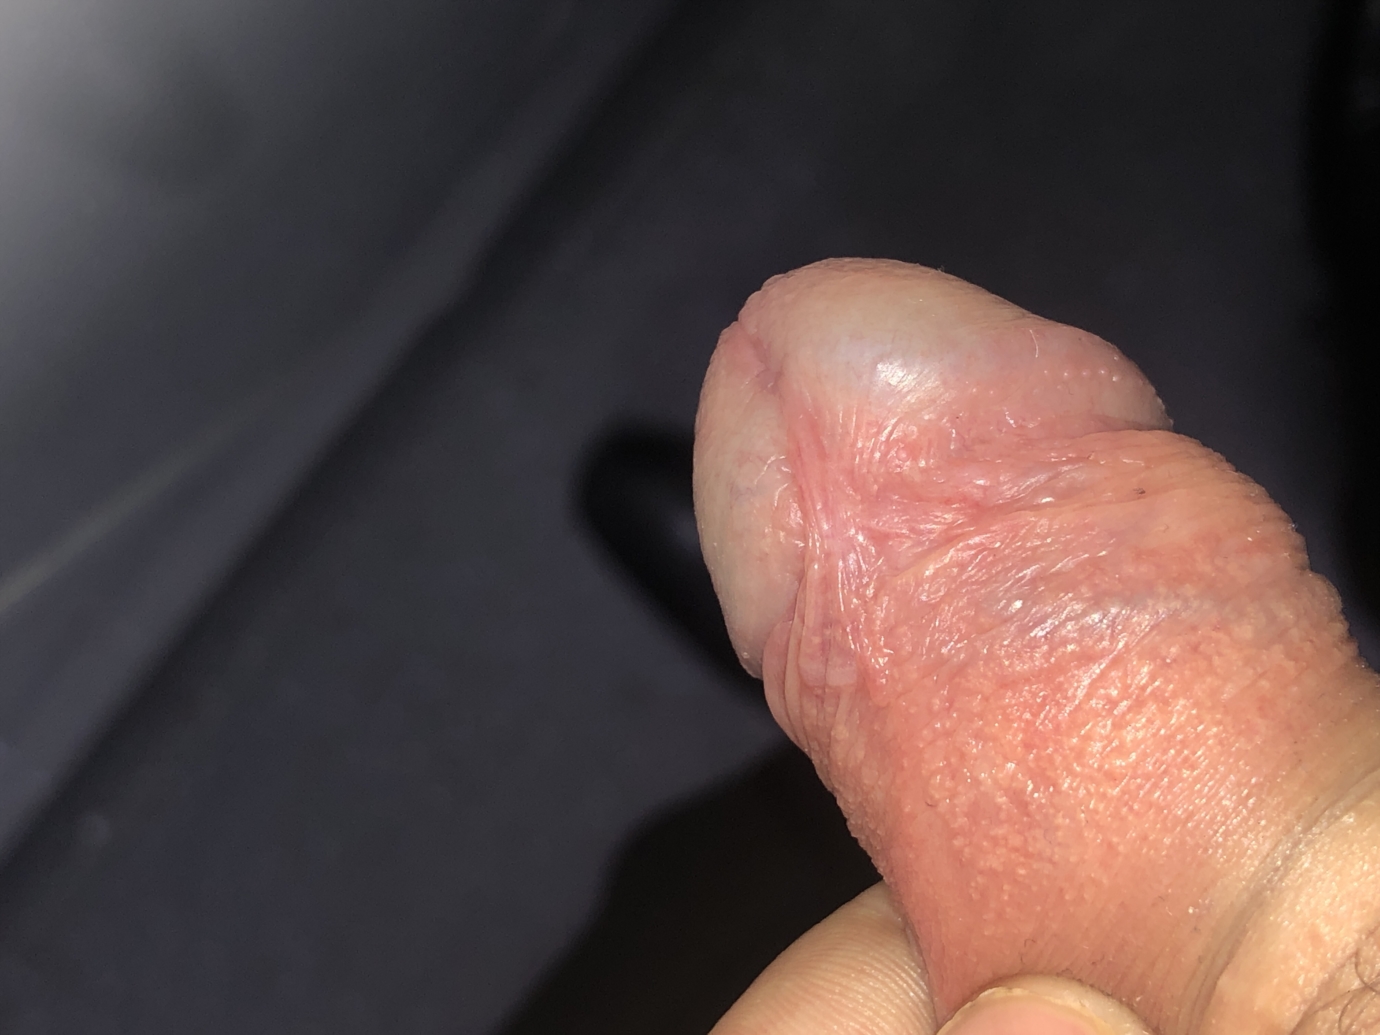 Why do i have little white dots on my penis